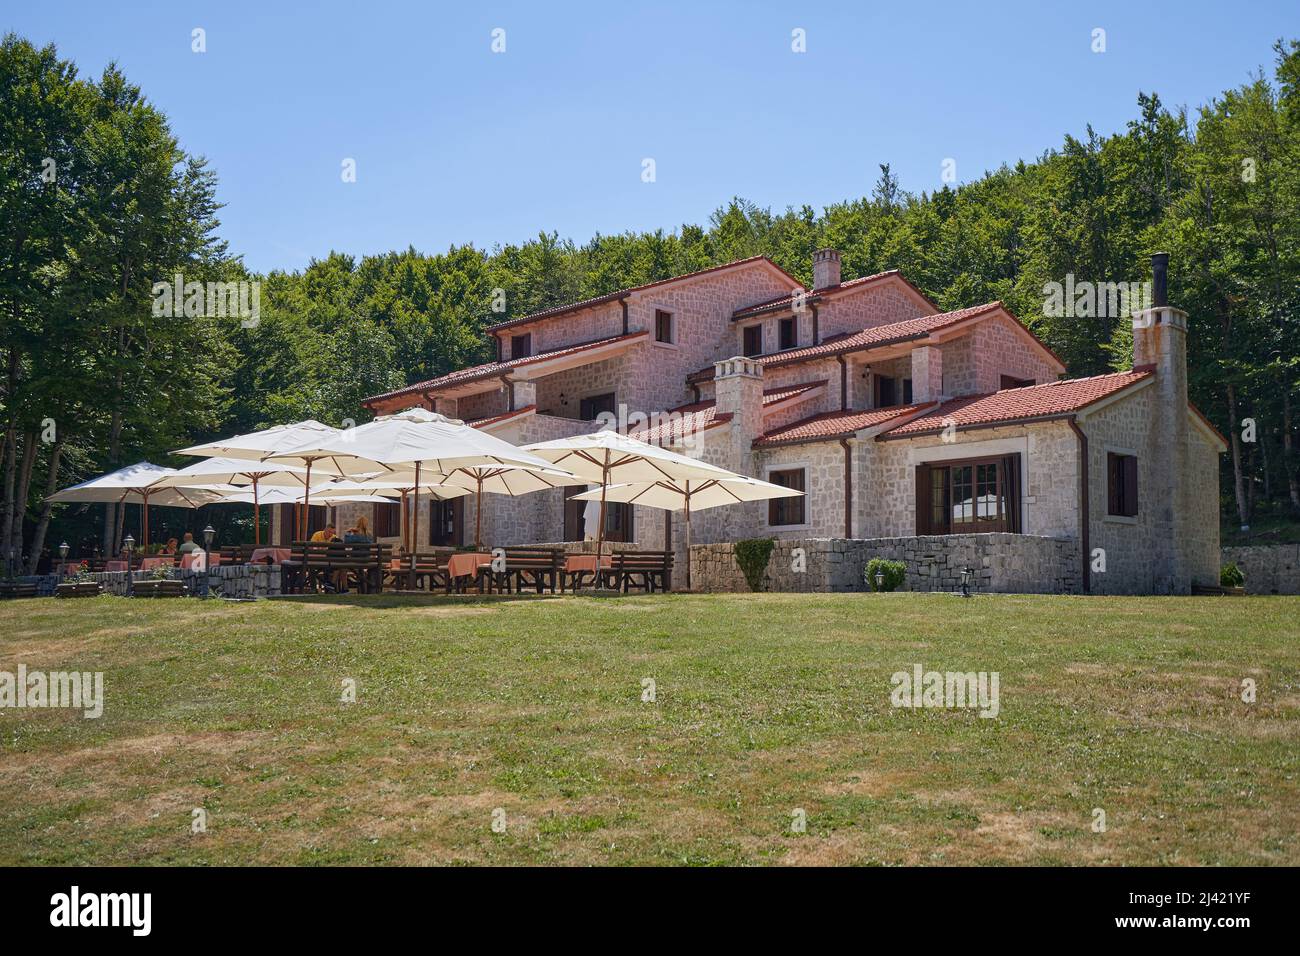 CETINJE, MONTENEGRO - JULY 23, 2021: Country hotel Ivanov Konak made of stone near the forest Stock Photo